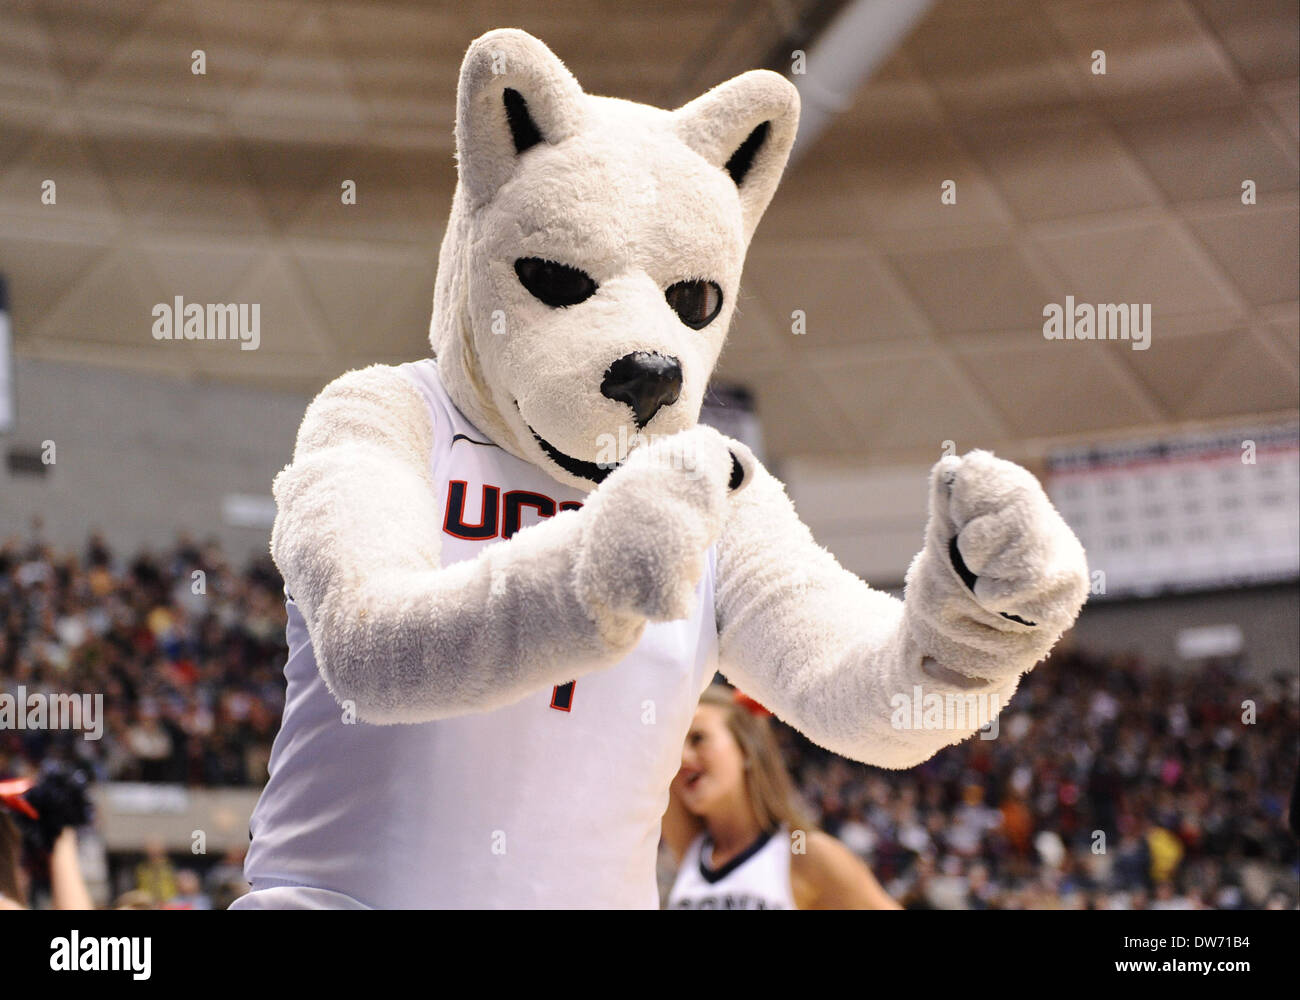 Storrs, CT, USA. 1st March 2014.  The UConn mascot Johnathan performs in a timeout during the 2nd half of the NCAA womens basketball game between Rutgers and Connecticut at Gampel Pavilion in Storrs, CT. UConn beat Rutgers in a final conference game between the two schools 72-35. Bill Shettle / Cal Sport Media. Stock Photo